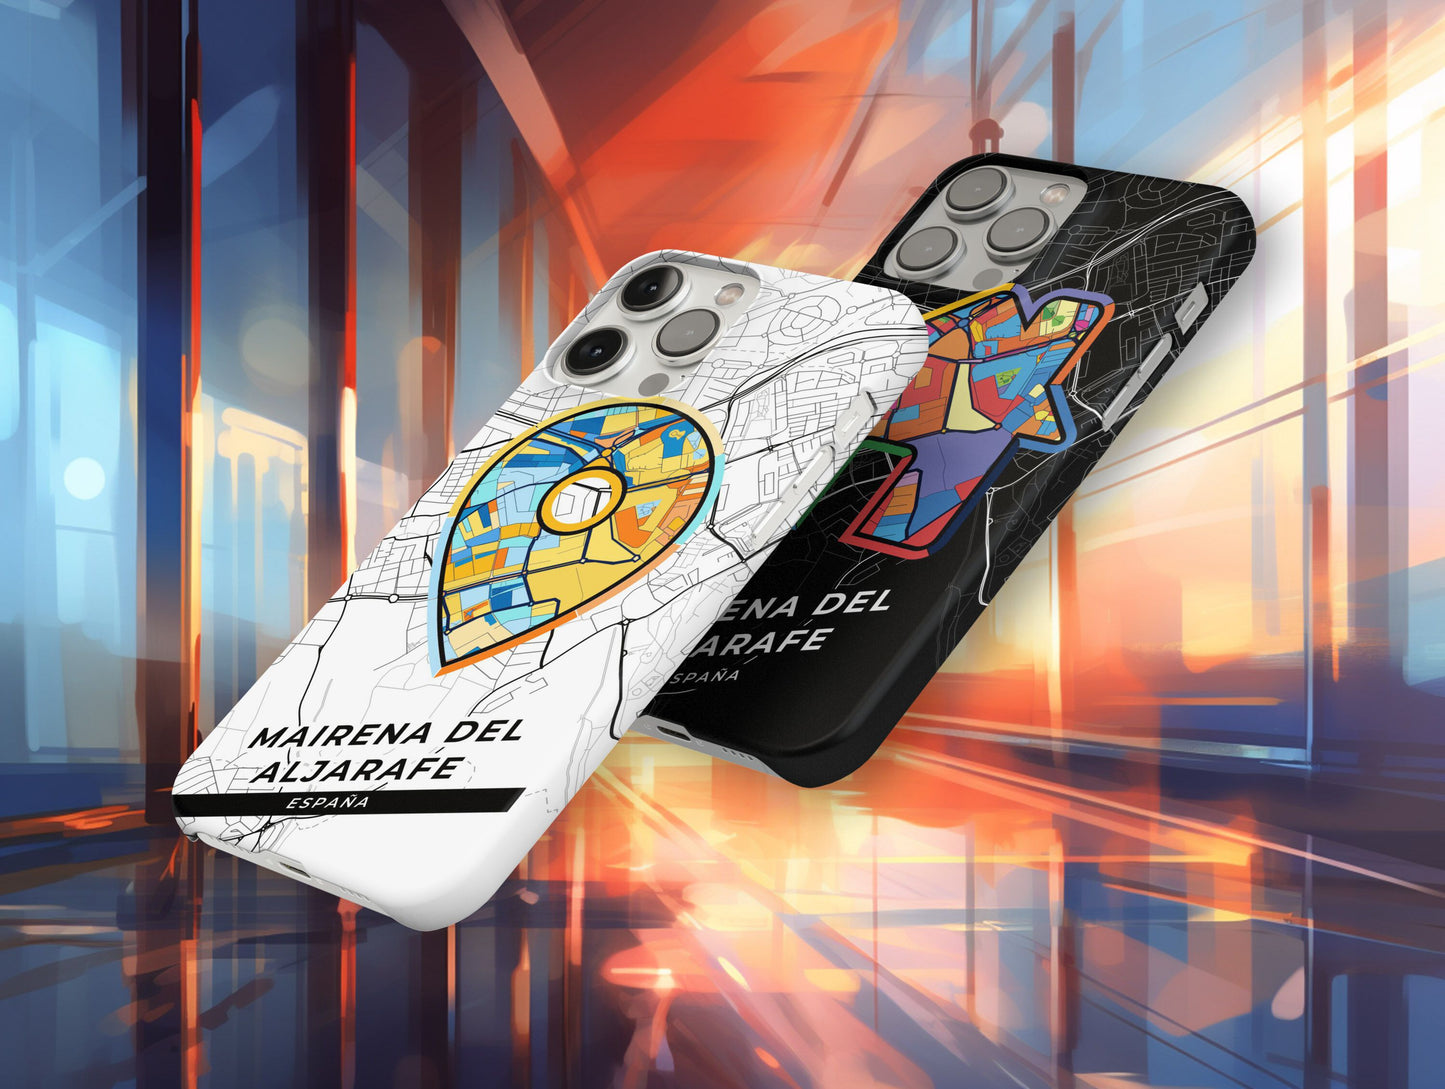 Mairena Del Aljarafe Spain slim phone case with colorful icon. Birthday, wedding or housewarming gift. Couple match cases.